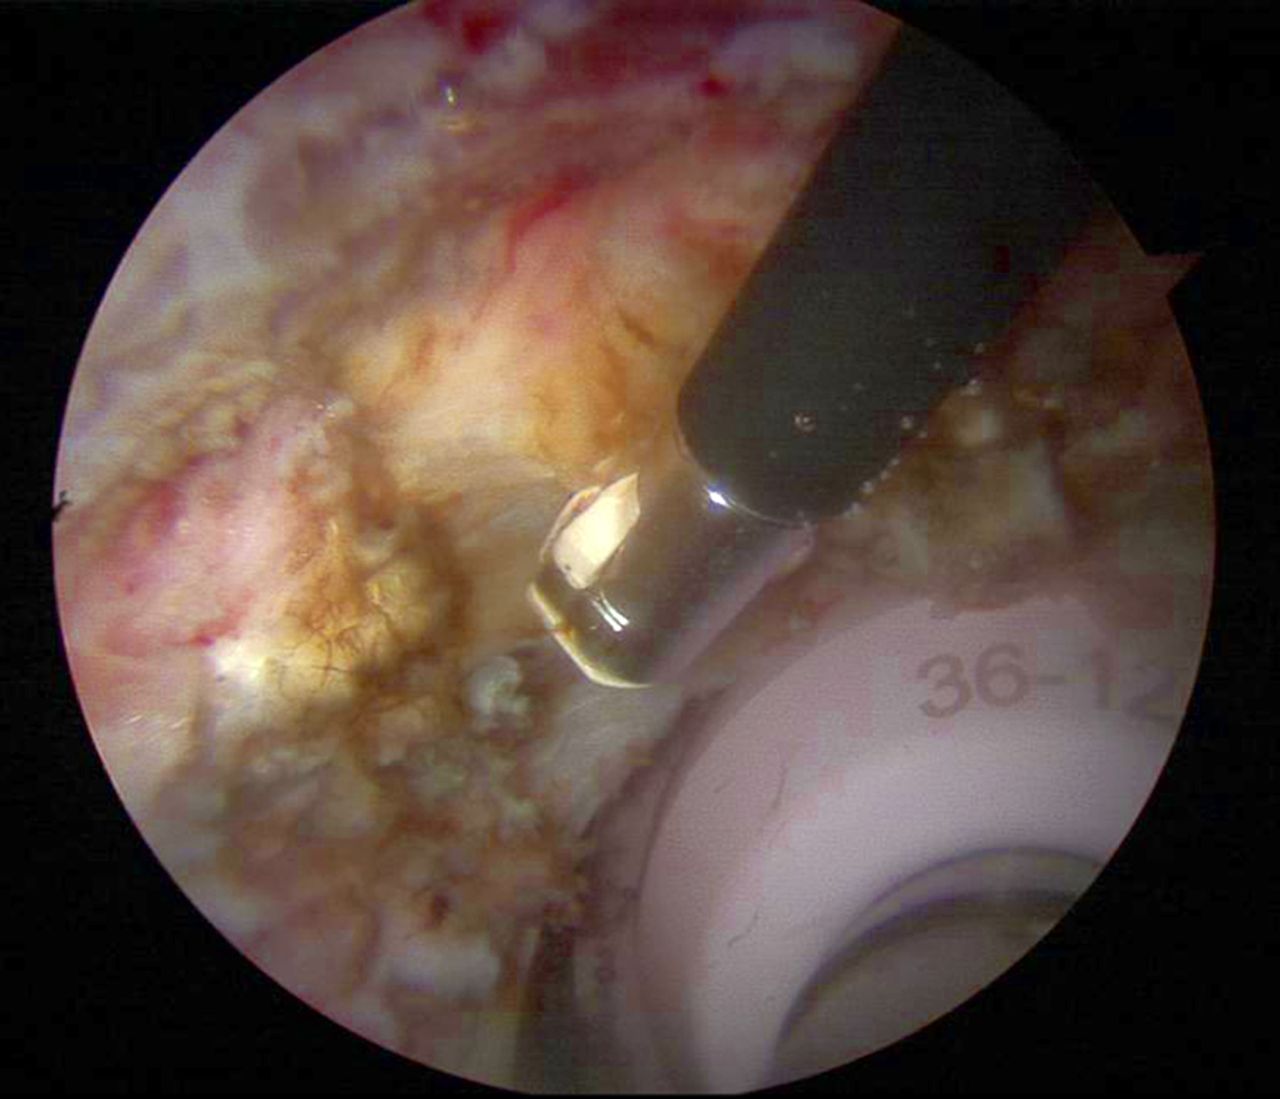 Figs. 4a - 4b 
          Arthroscopic psoas release for iliopsoas
impingement after a) total and b) resurfacing hip replacement.
        